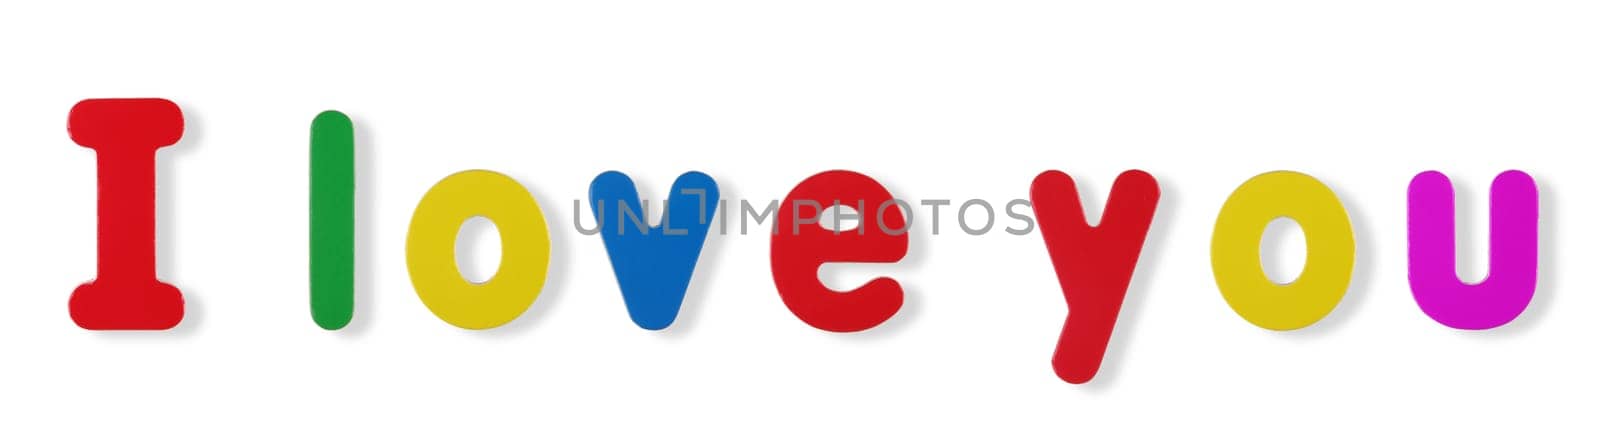 I love you words in coloured magnetic letters on white with clipping path to remove shadow